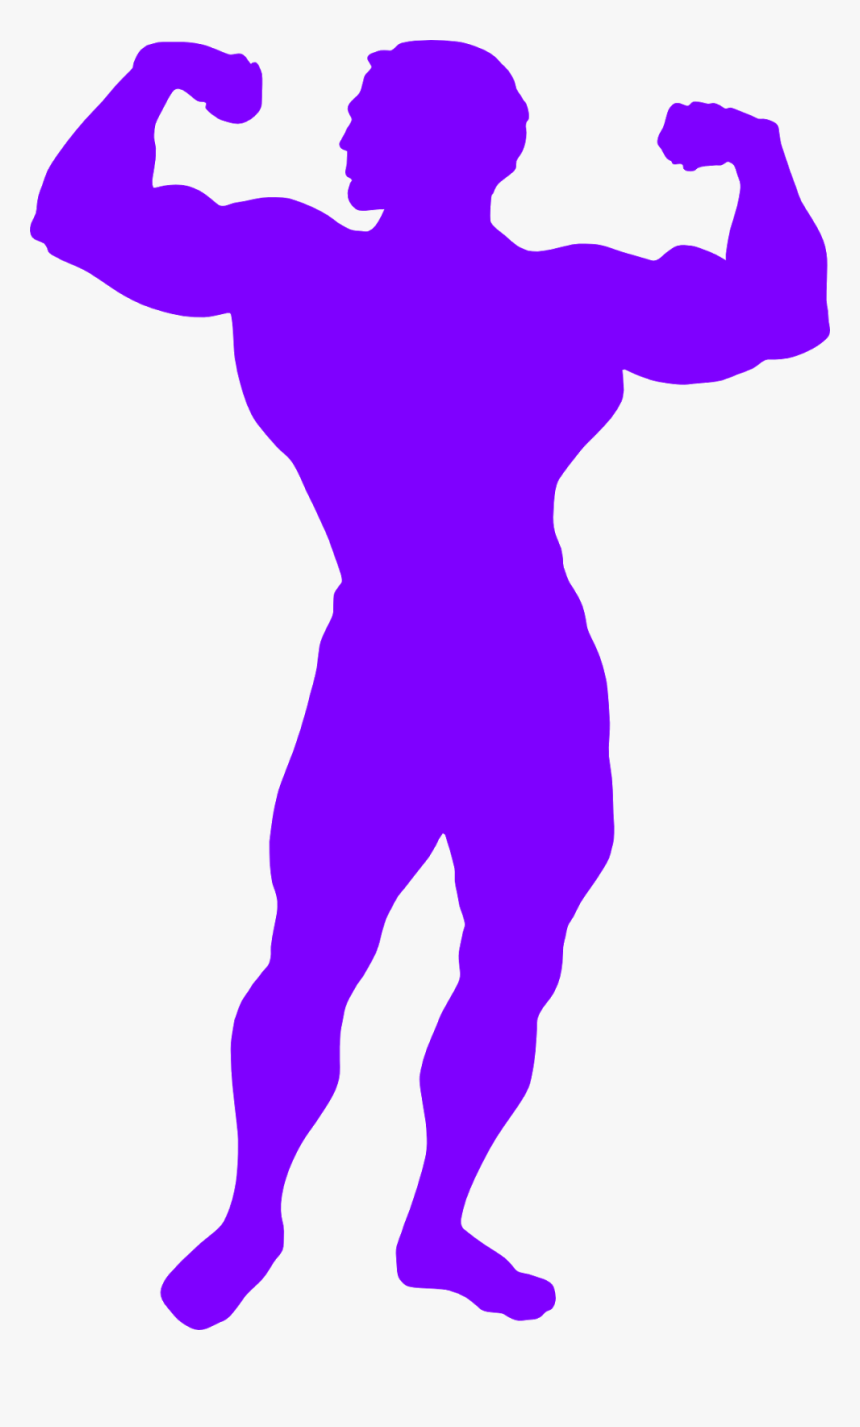 Buff 170 Pounds, Weight Loss Pictures, Weight Loss - Muscle Man Silhouette Png, Transparent Png, Free Download